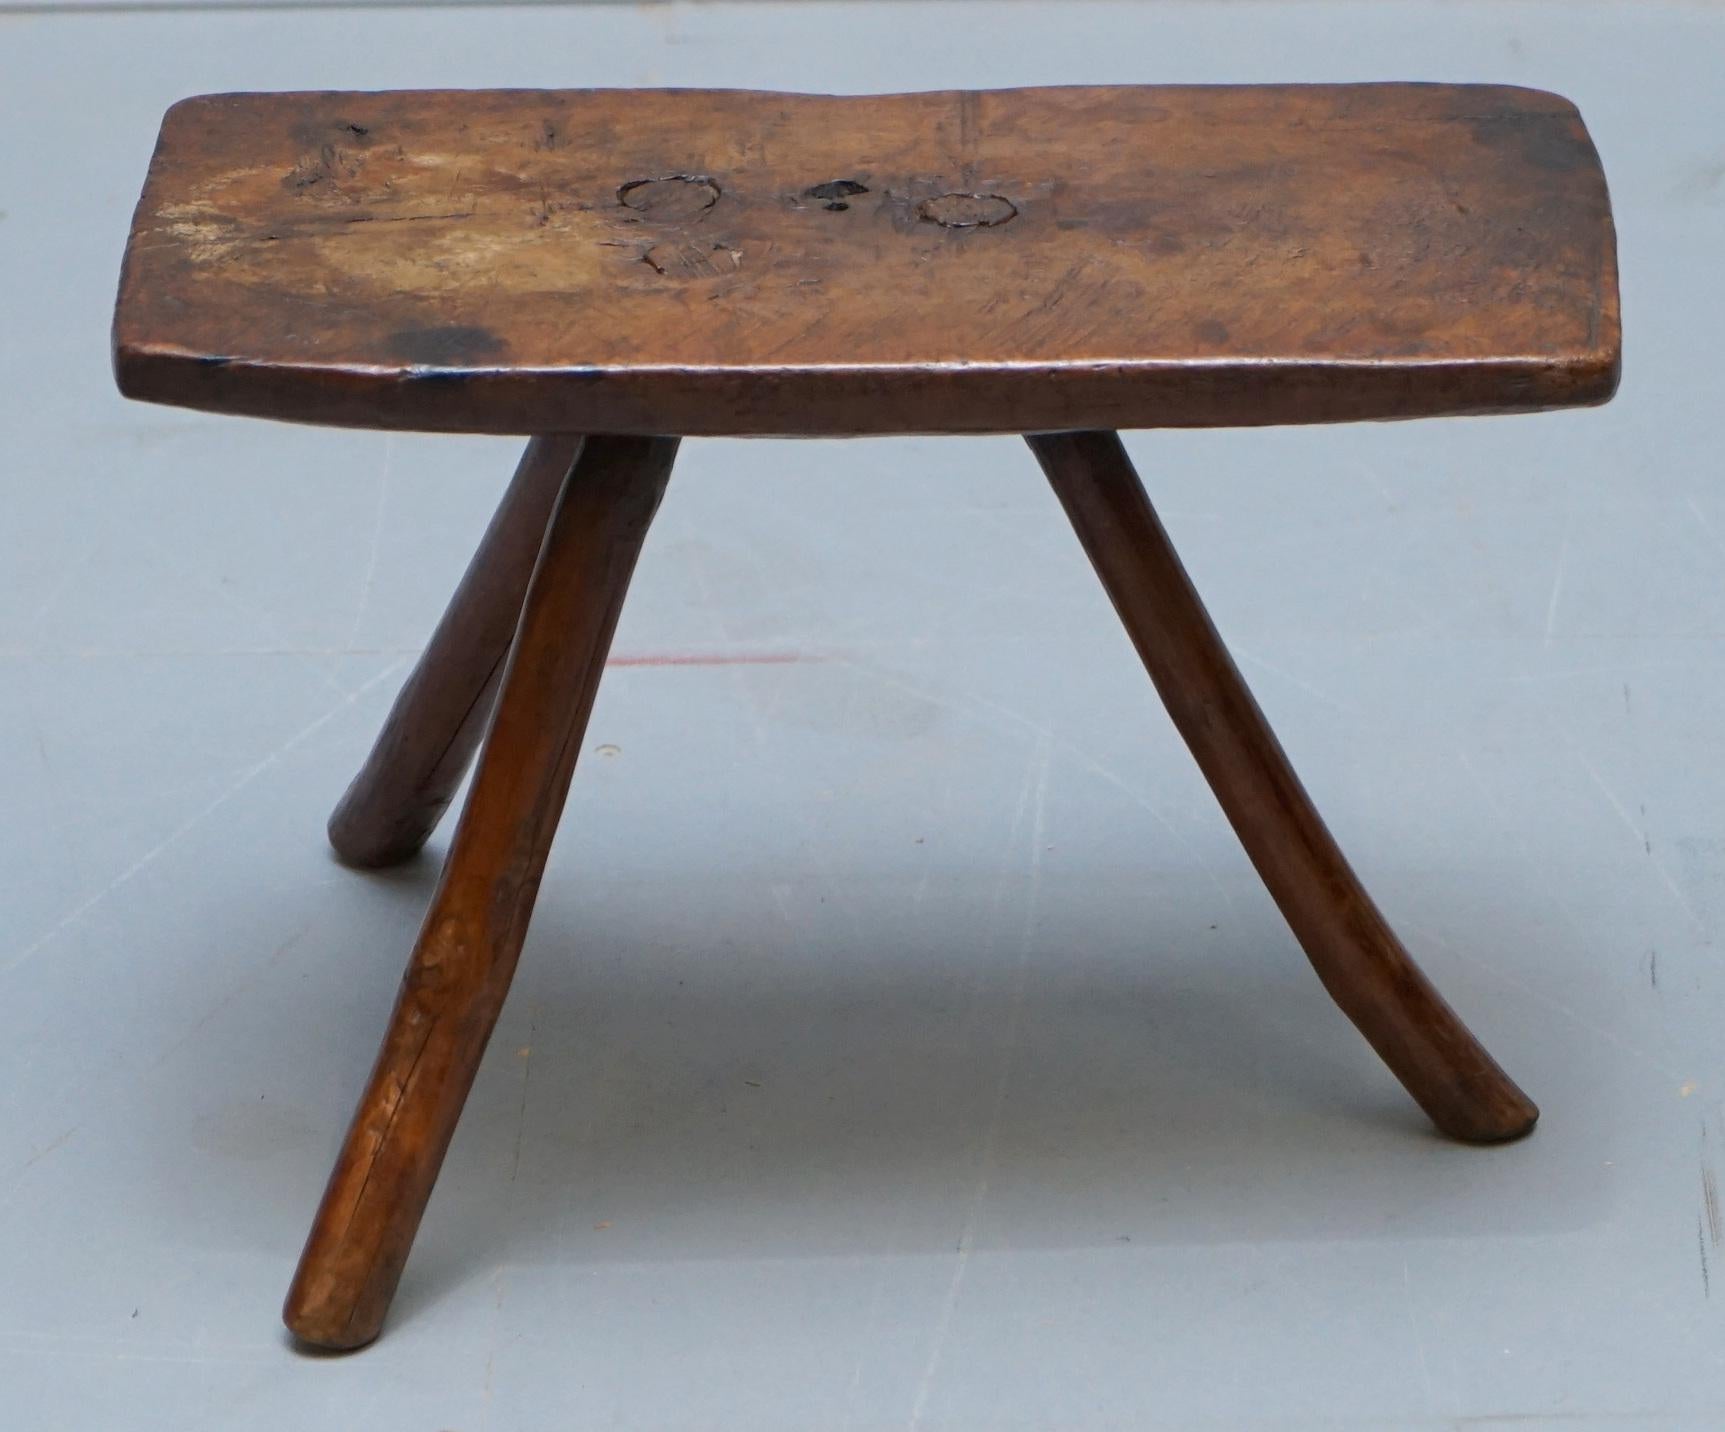 We are delighted to offer this absolutely stunning circa 1800 primitive French stool

What a stunning piece, the wood tells a thousand story’s, just look how its hand carved, warped from age and use, it is like eye candy

We have cleaned waxed